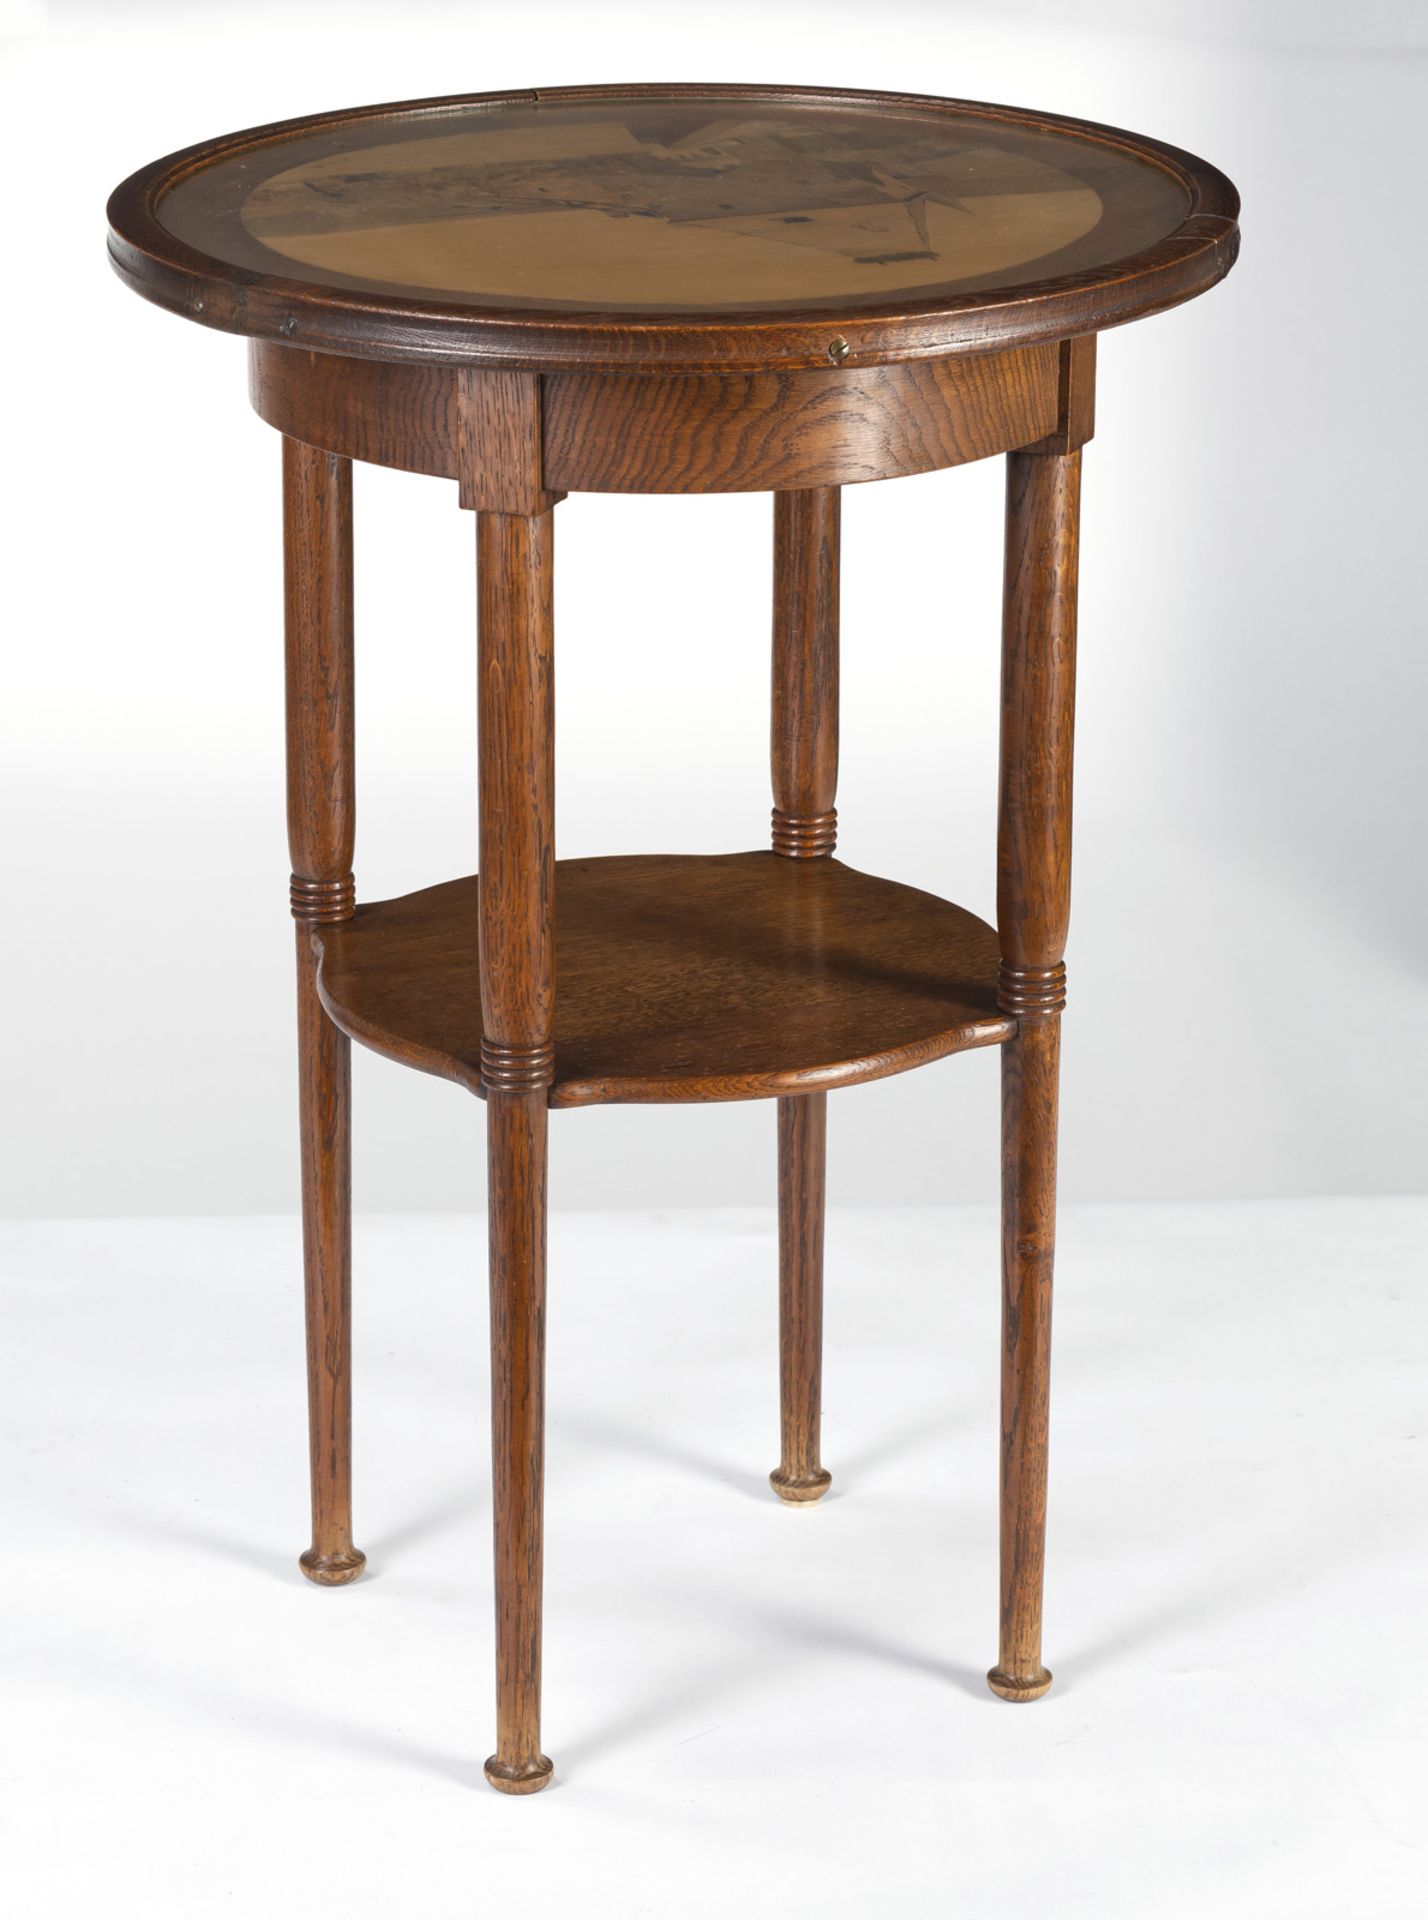 A FRENCH INLAID ART NOUVEAU OCCASIONAL TABLE - Image 2 of 5